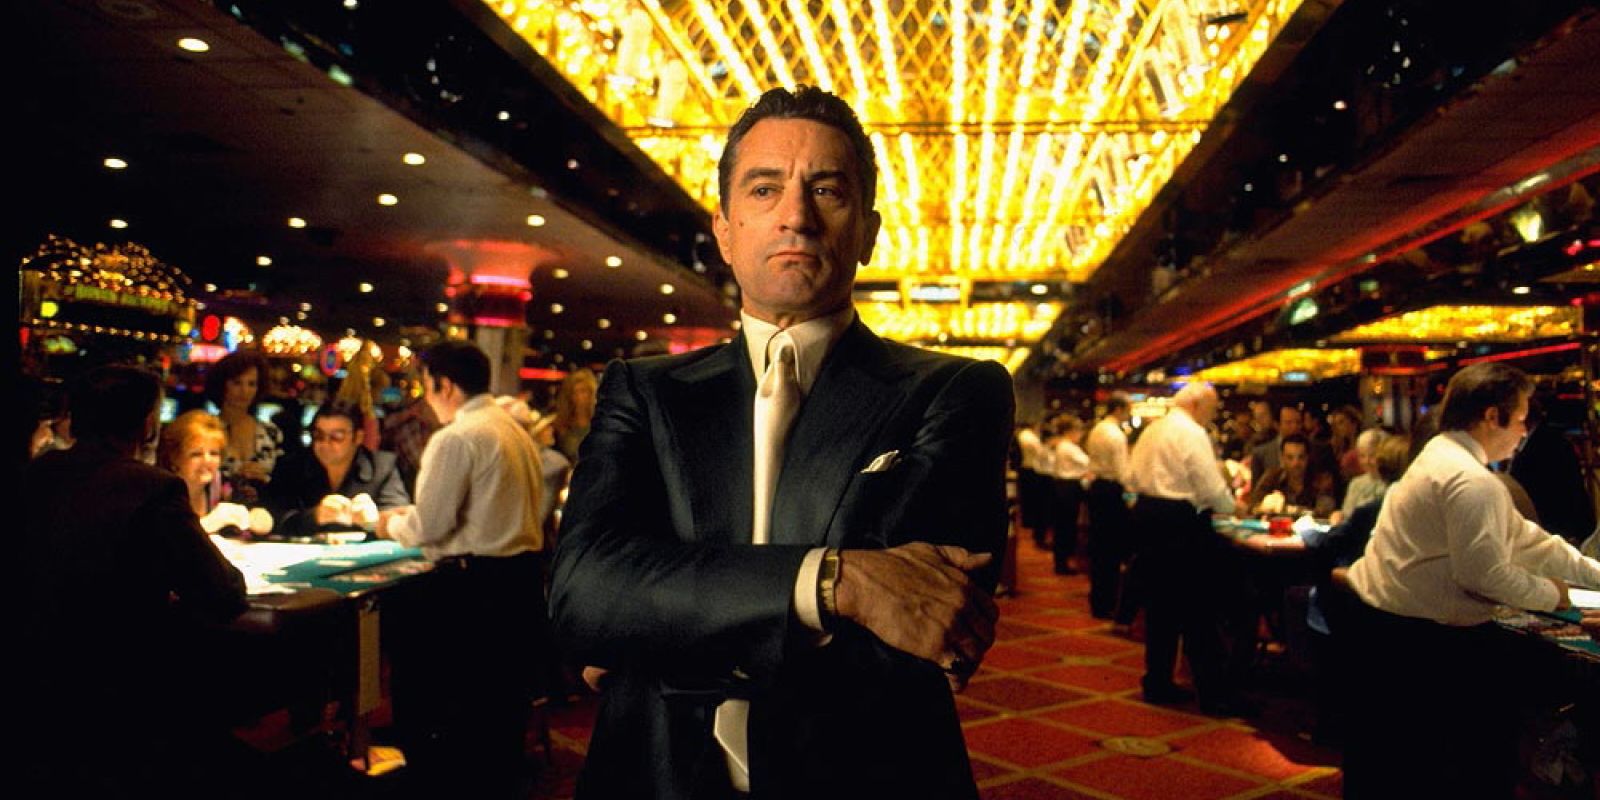 The 10 Best Martin Scorsese Films Of All Time (According To IMDb)